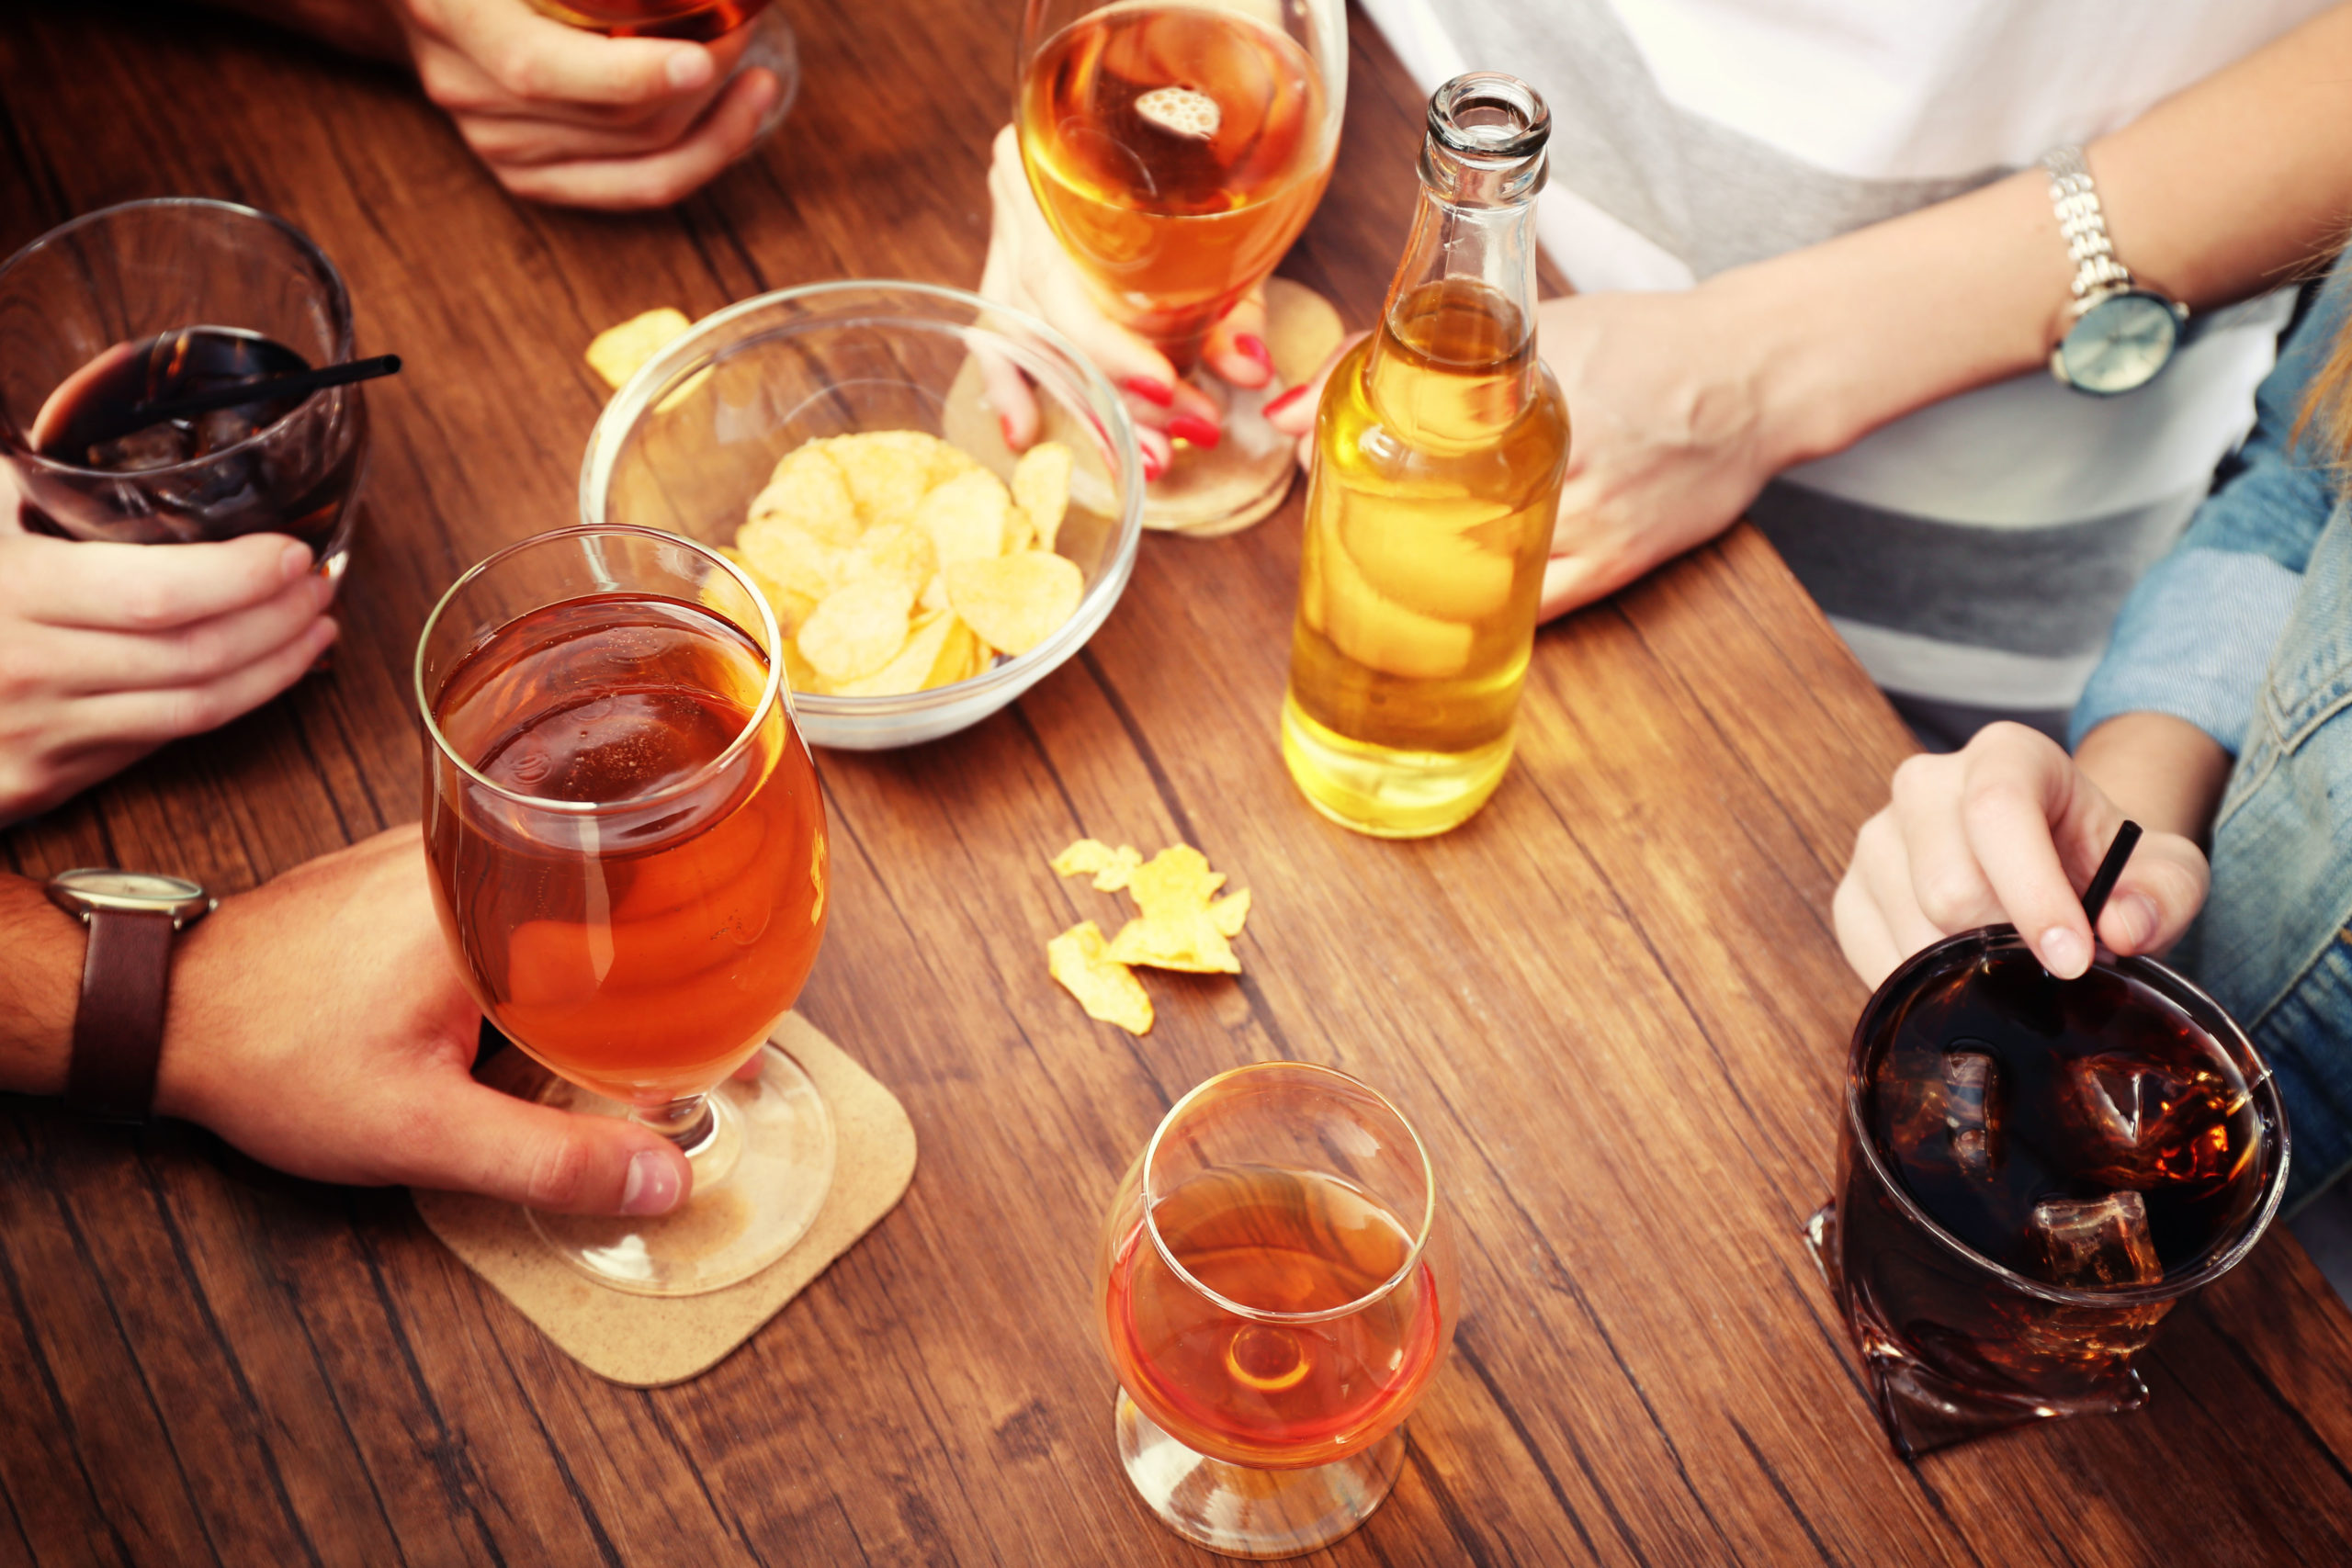 5 Drinks A Week Could Shorten Your Life